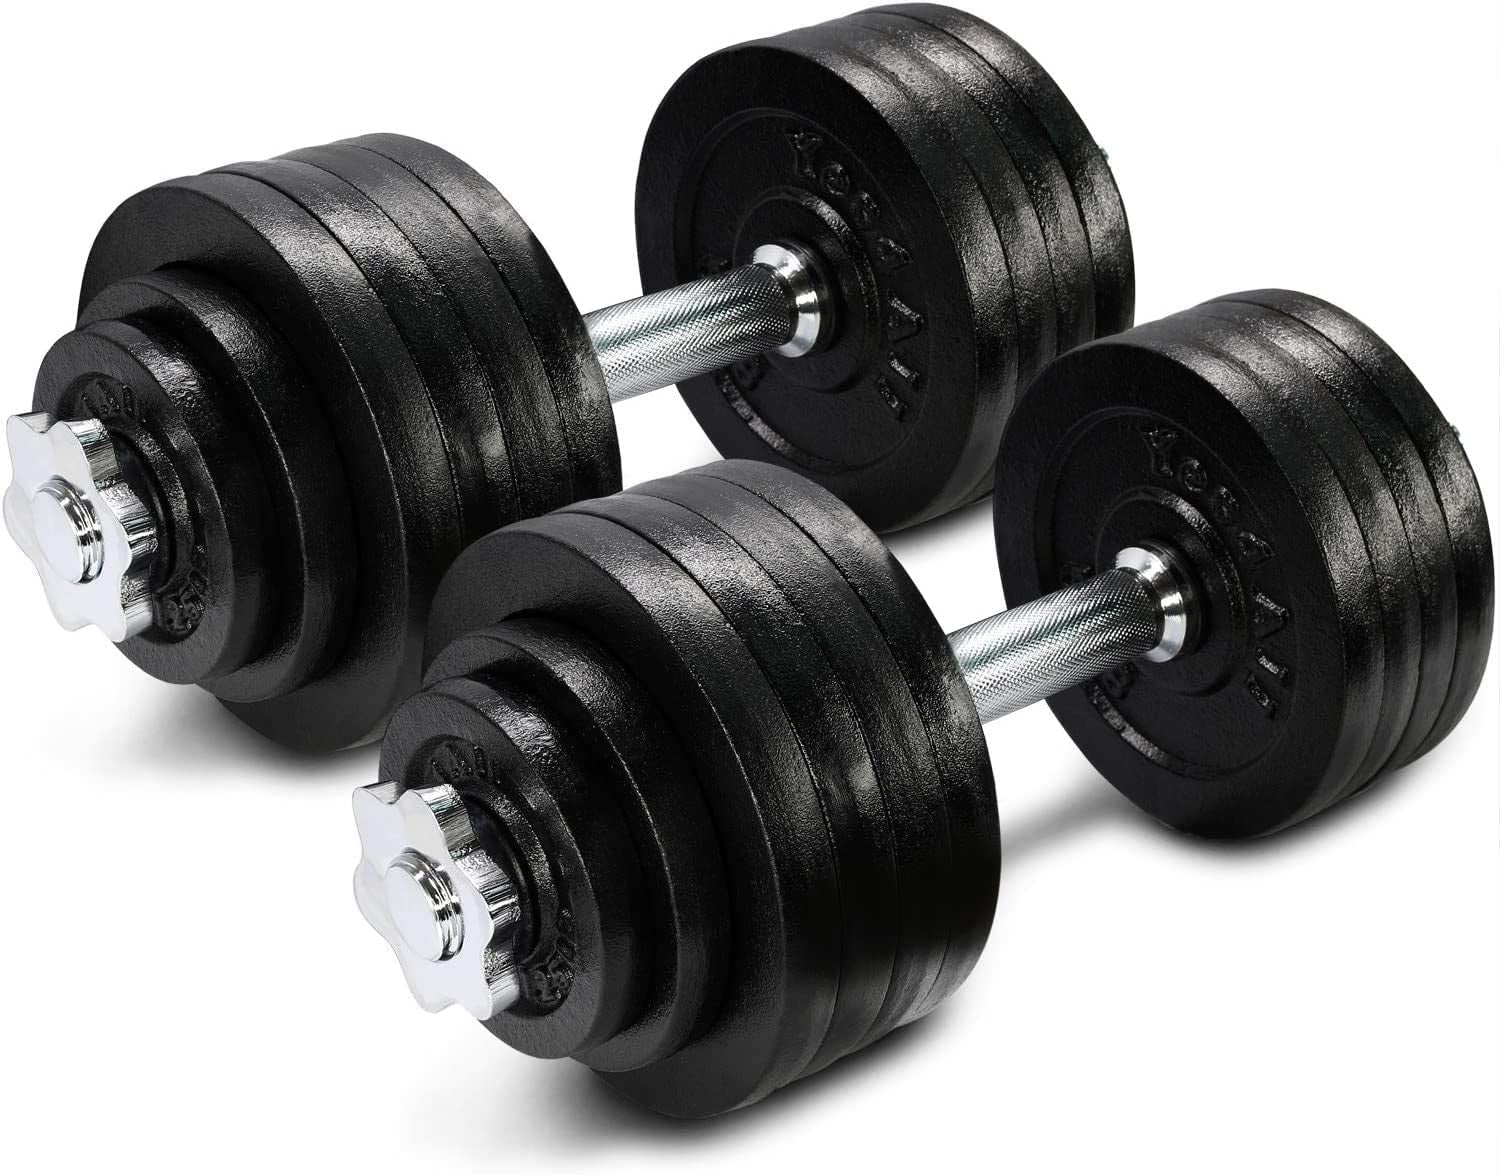 105lb total Adjustable Dumbbells Weight Set with Cast Iron Weights YES4ALL 